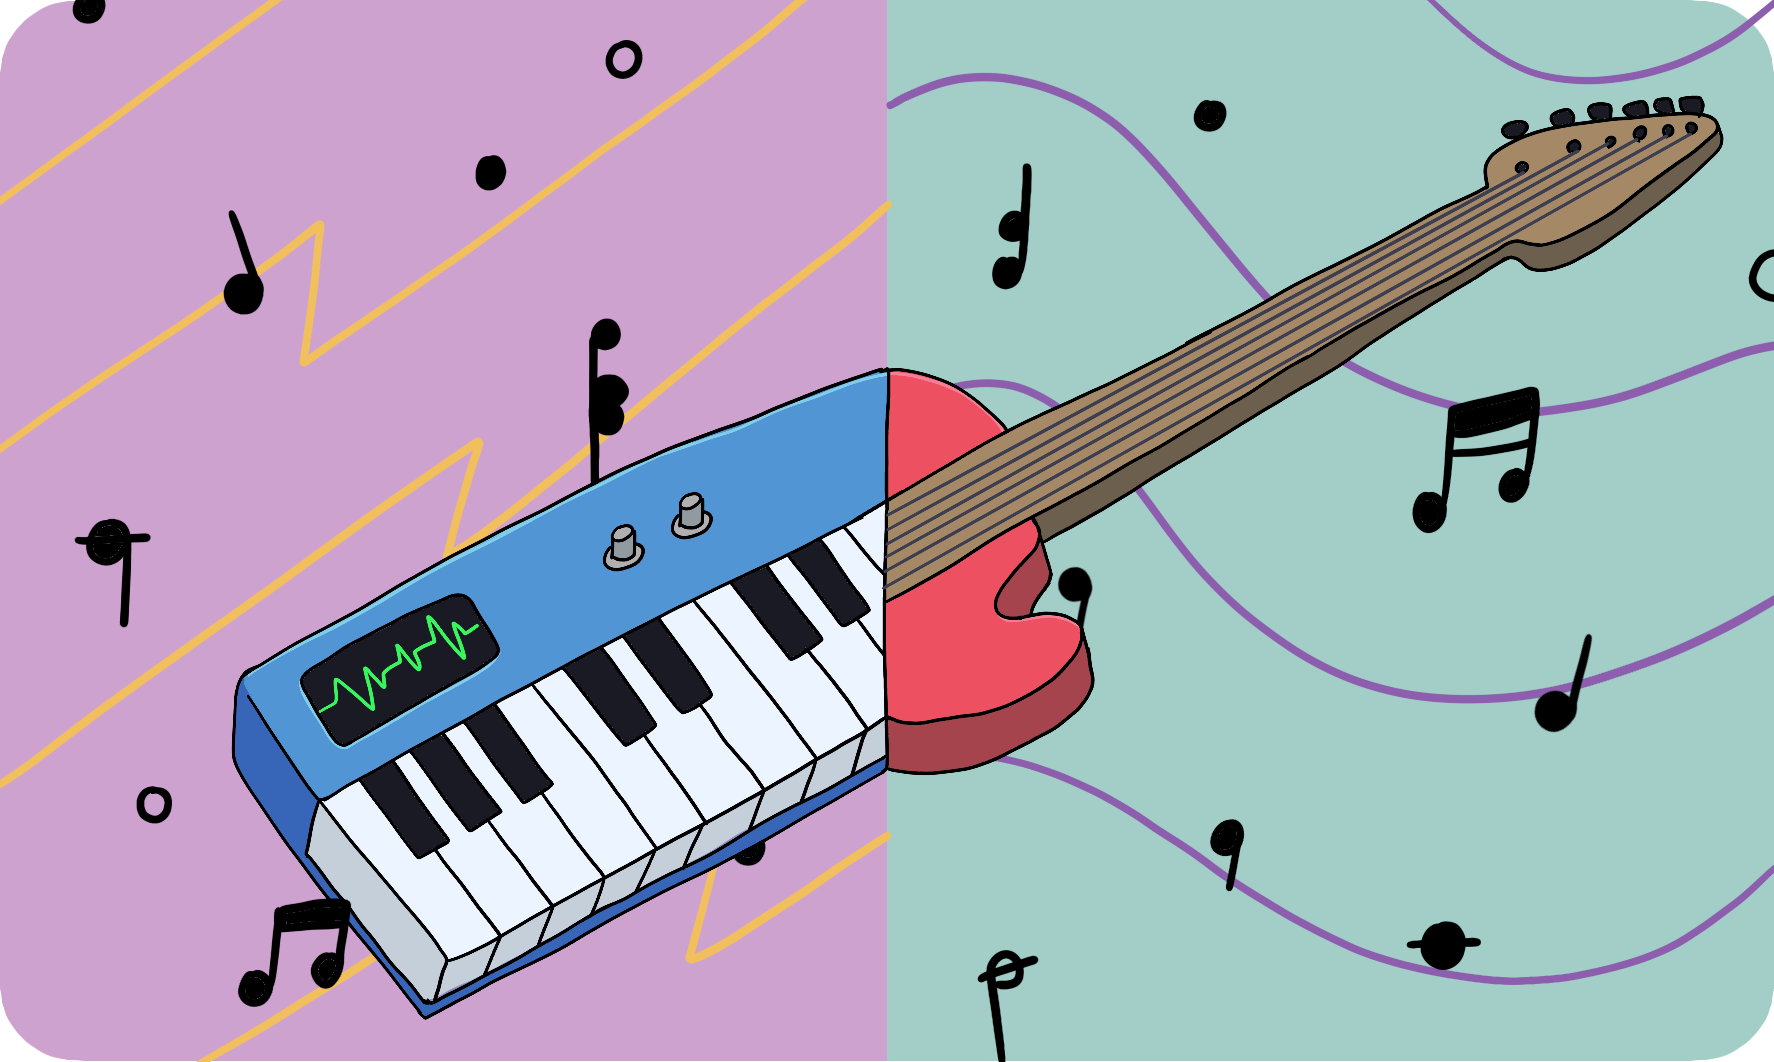 A keytar on the left and a guitar on the right,